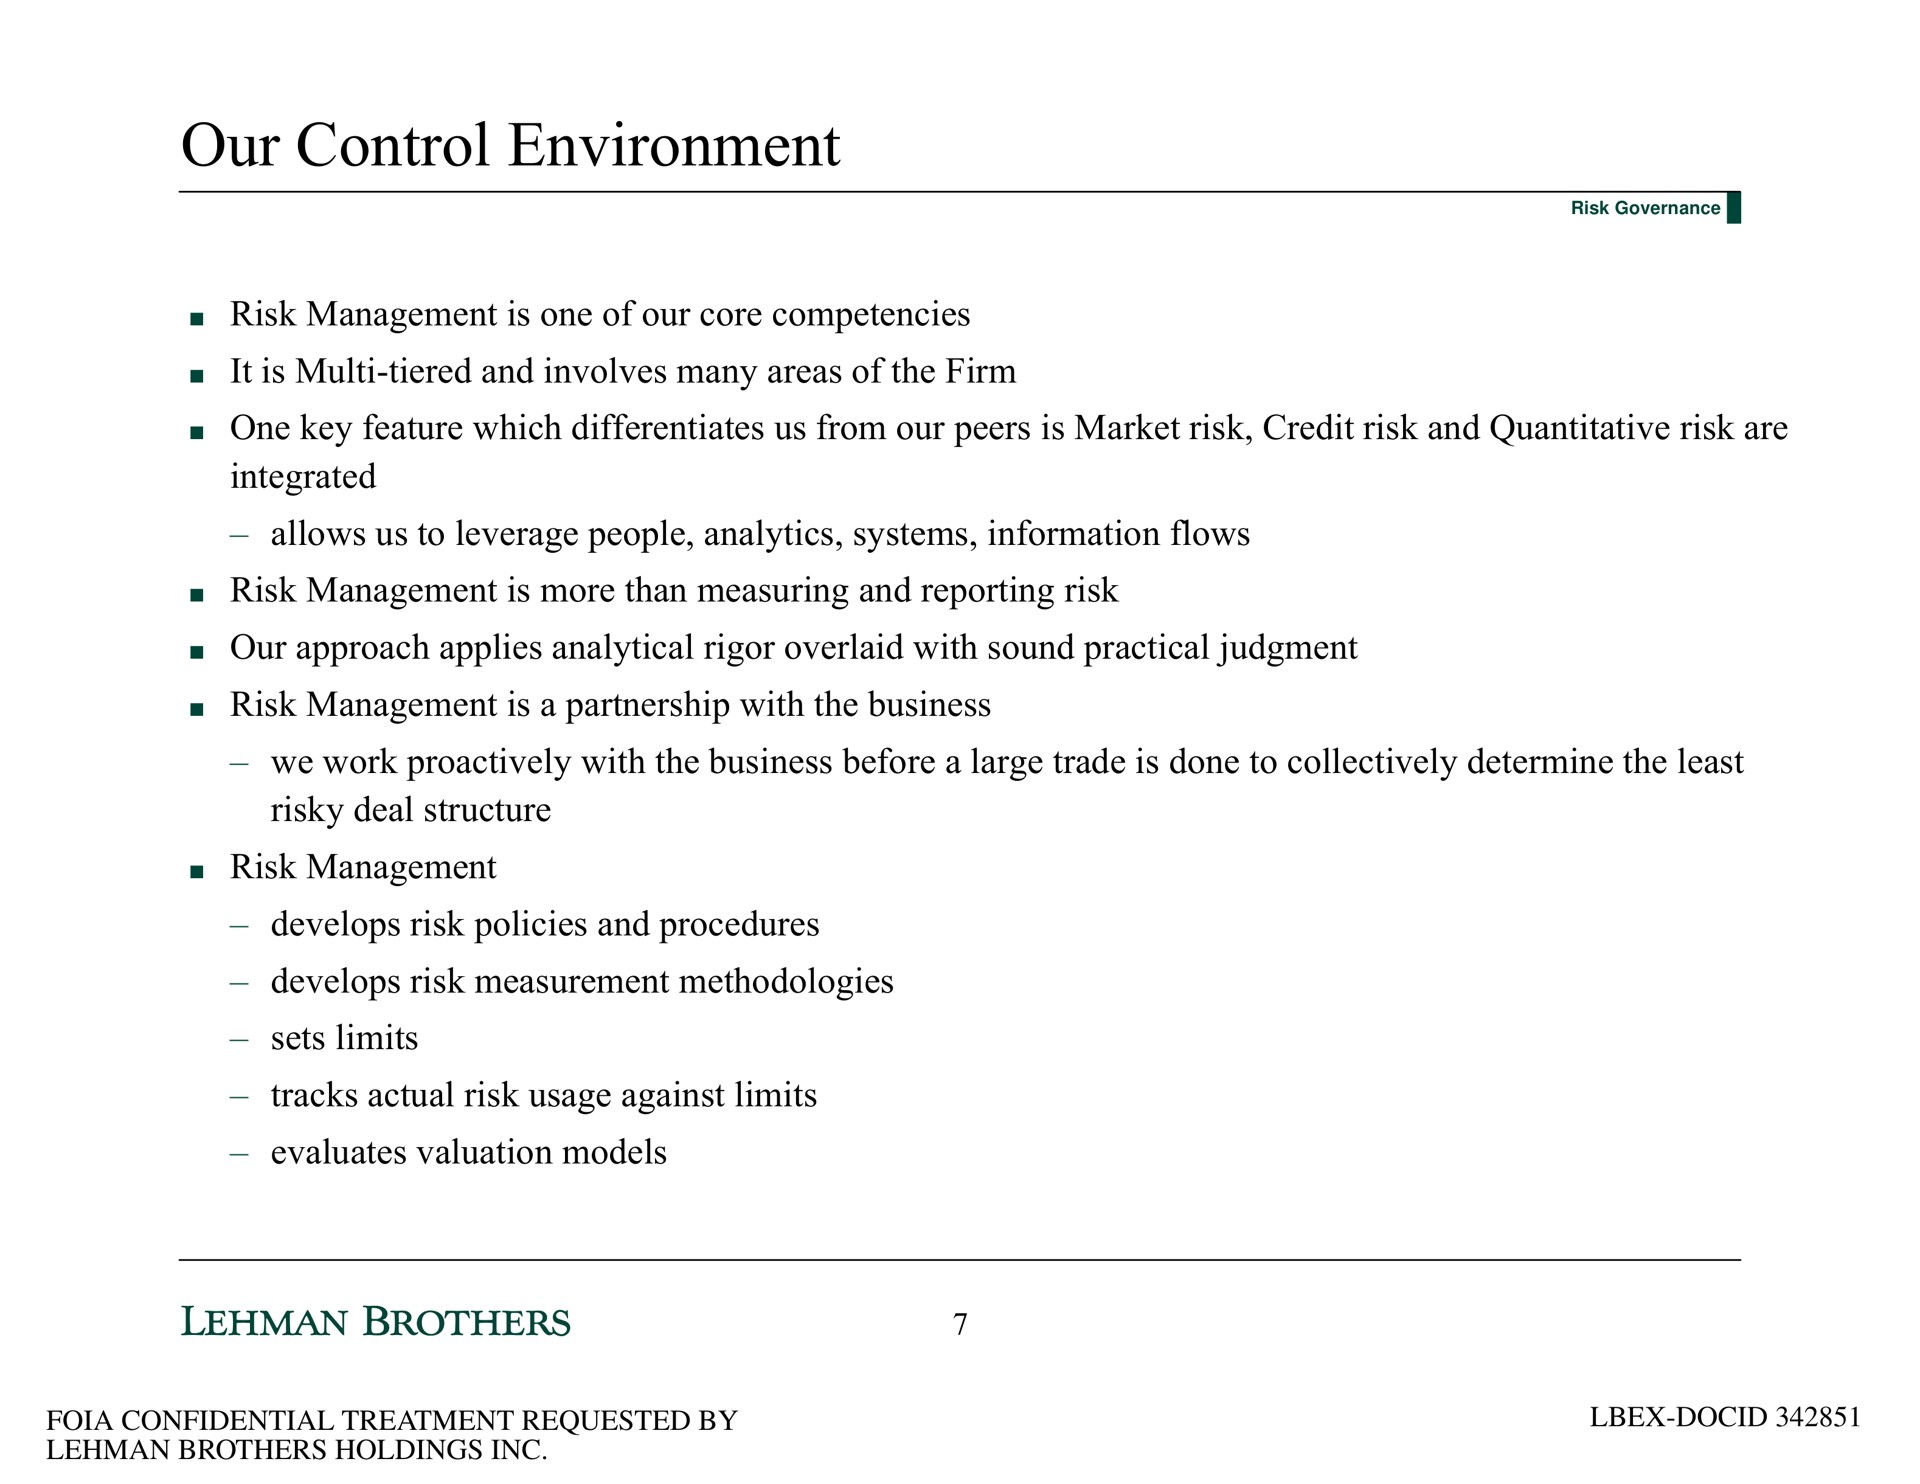 our control environment risk management is one of our core competencies it is tiered and involves many areas of the firm one key feature which differentiates us from our peers is market risk credit risk and quantitative risk are integrated allows us to leverage people analytics systems information flows risk management is more than measuring and reporting risk our approach applies analytical rigor overlaid with sound practical judgment risk management is a partnership with the business we work with the business before a large trade is done to collectively determine the least risky deal structure risk management develops risk policies and procedures develops risk measurement methodologies sets limits tracks actual risk usage against limits evaluates valuation models | Lehman Brothers